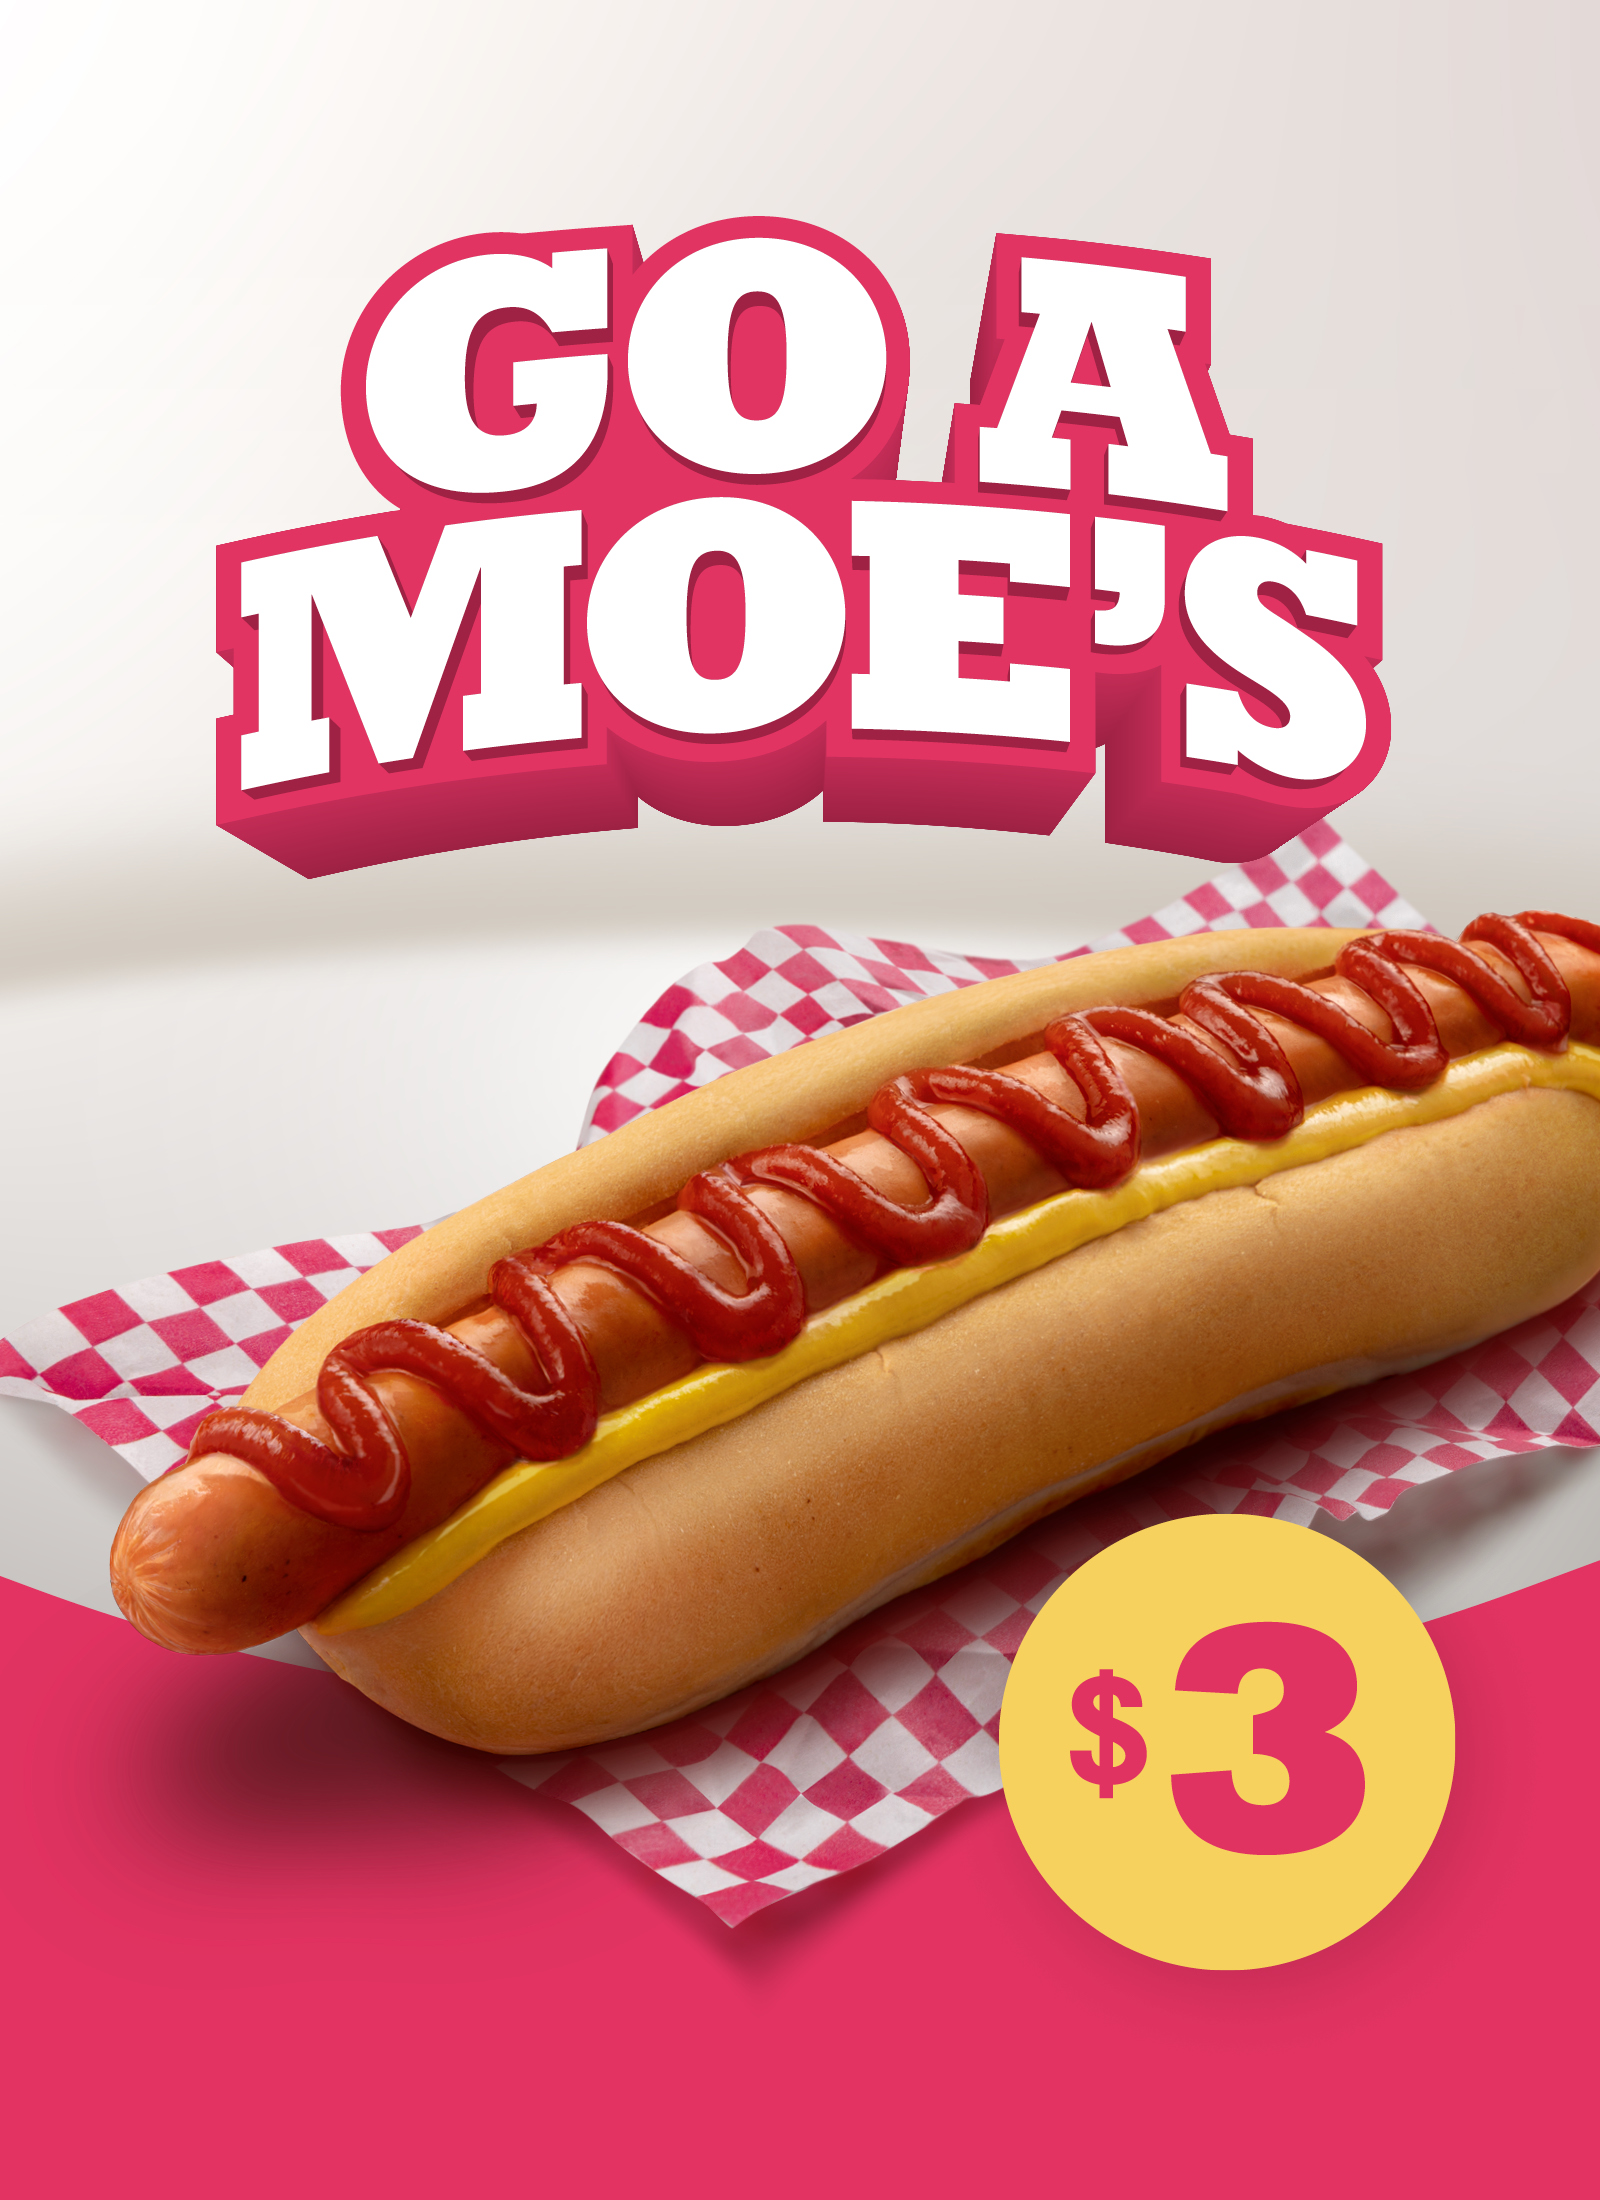 Moes - $3 Traditional Dog